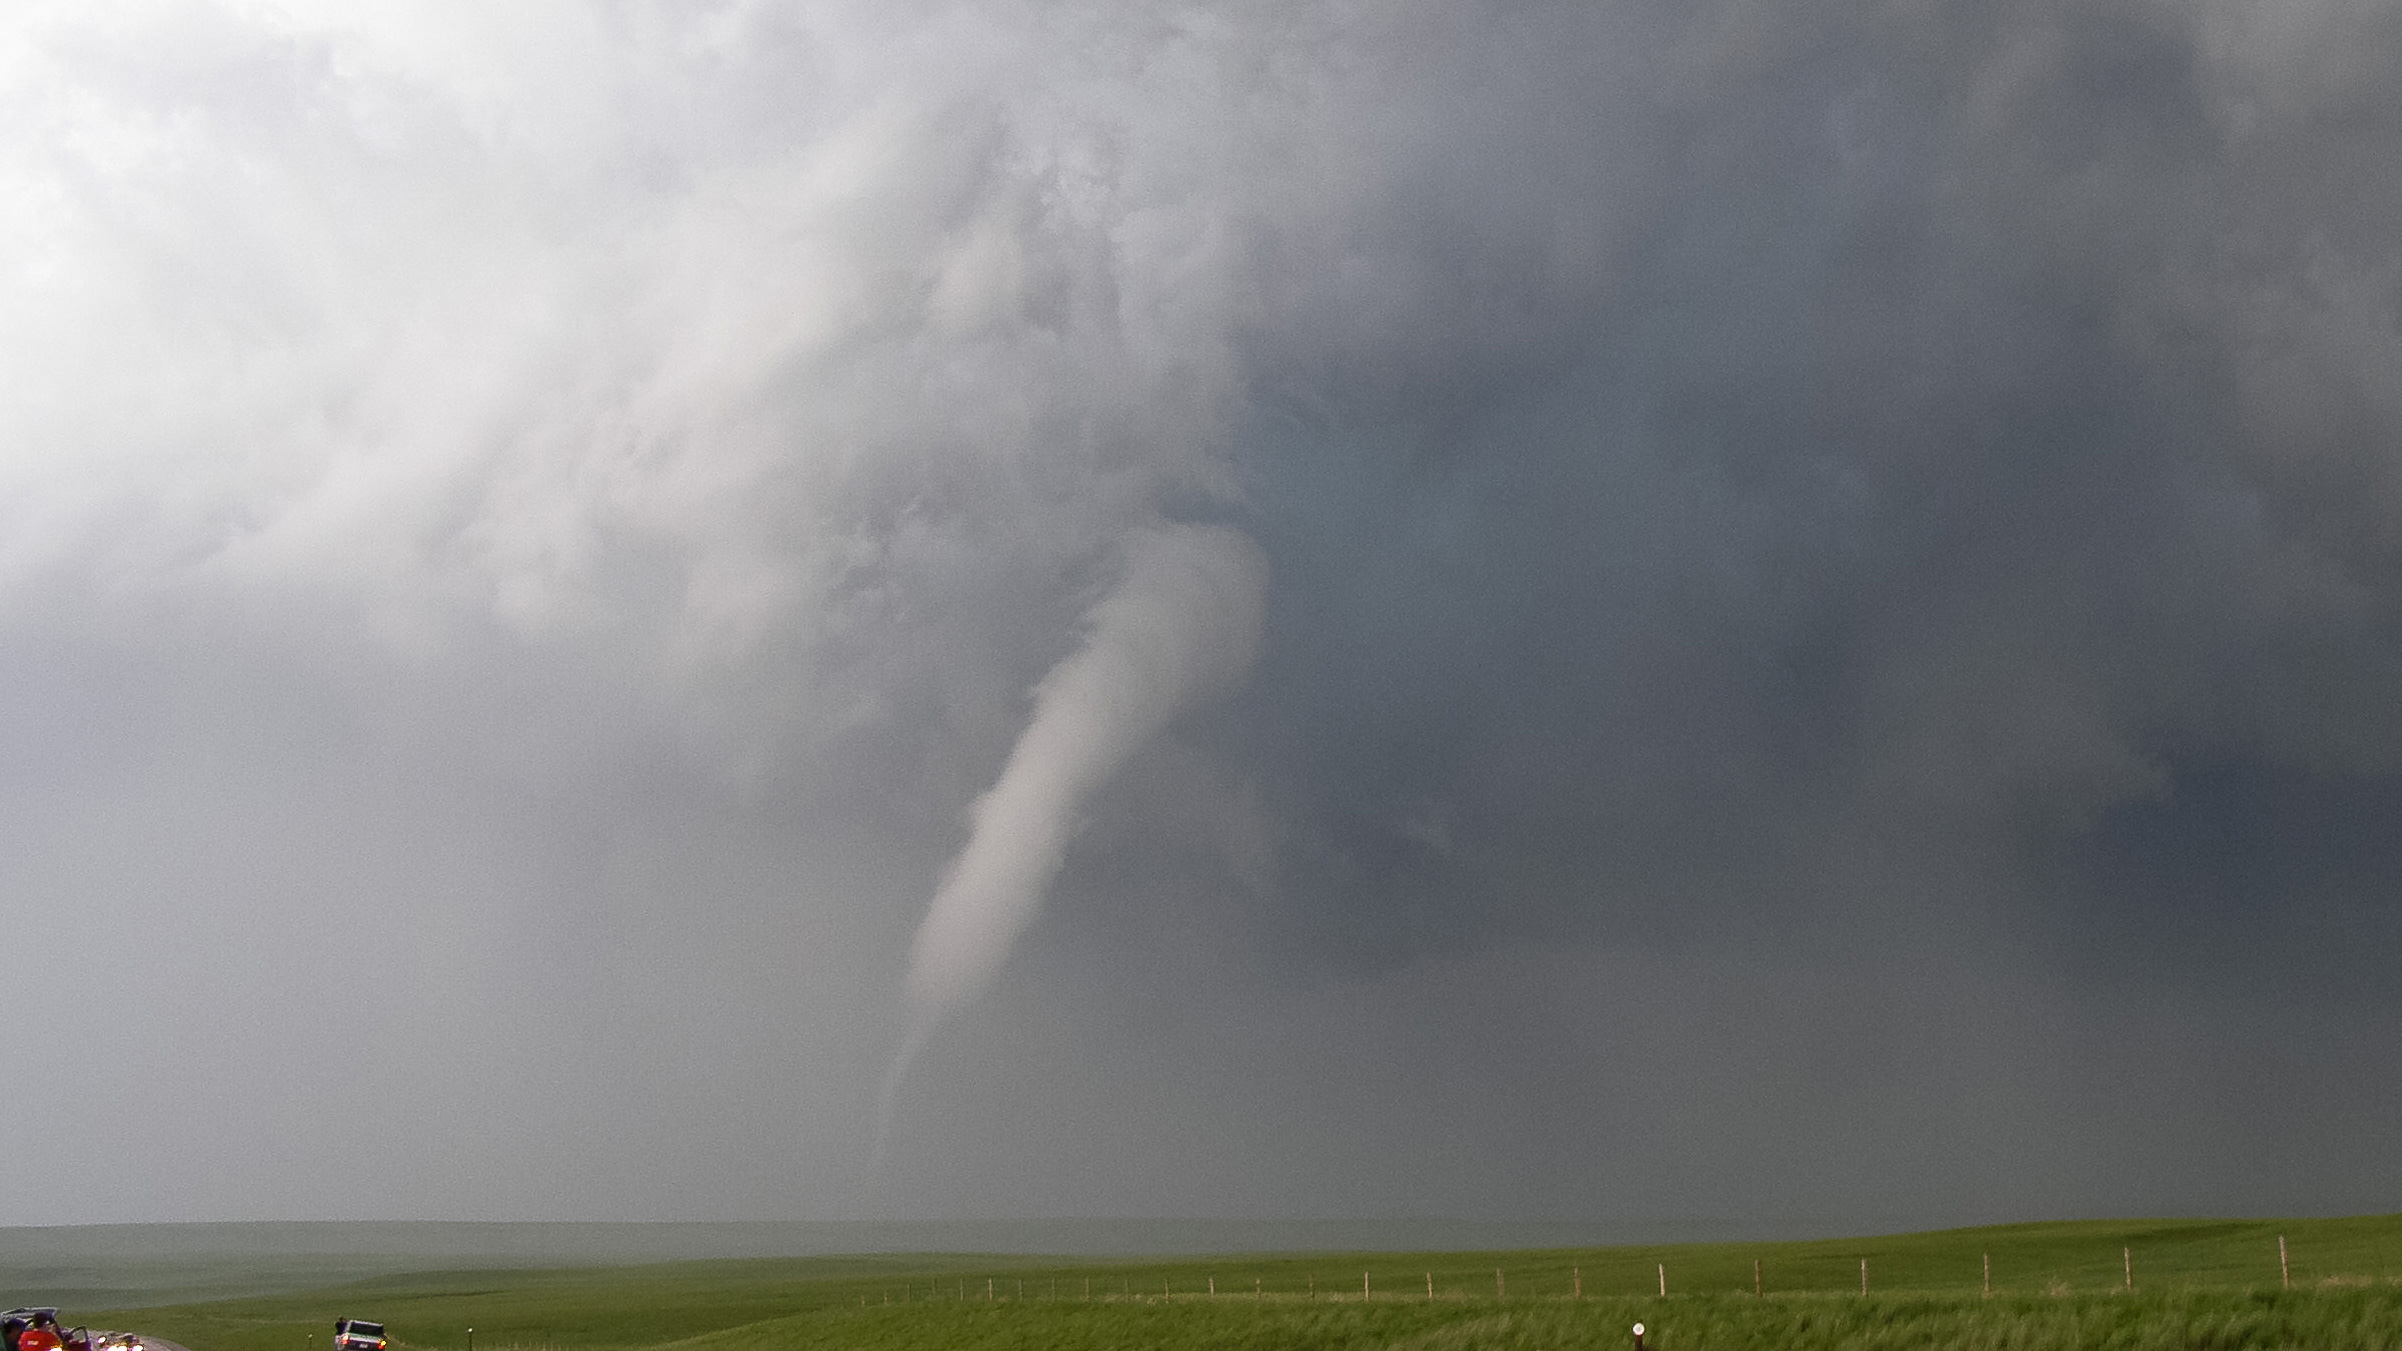 Scientists to launch new tornado research mission